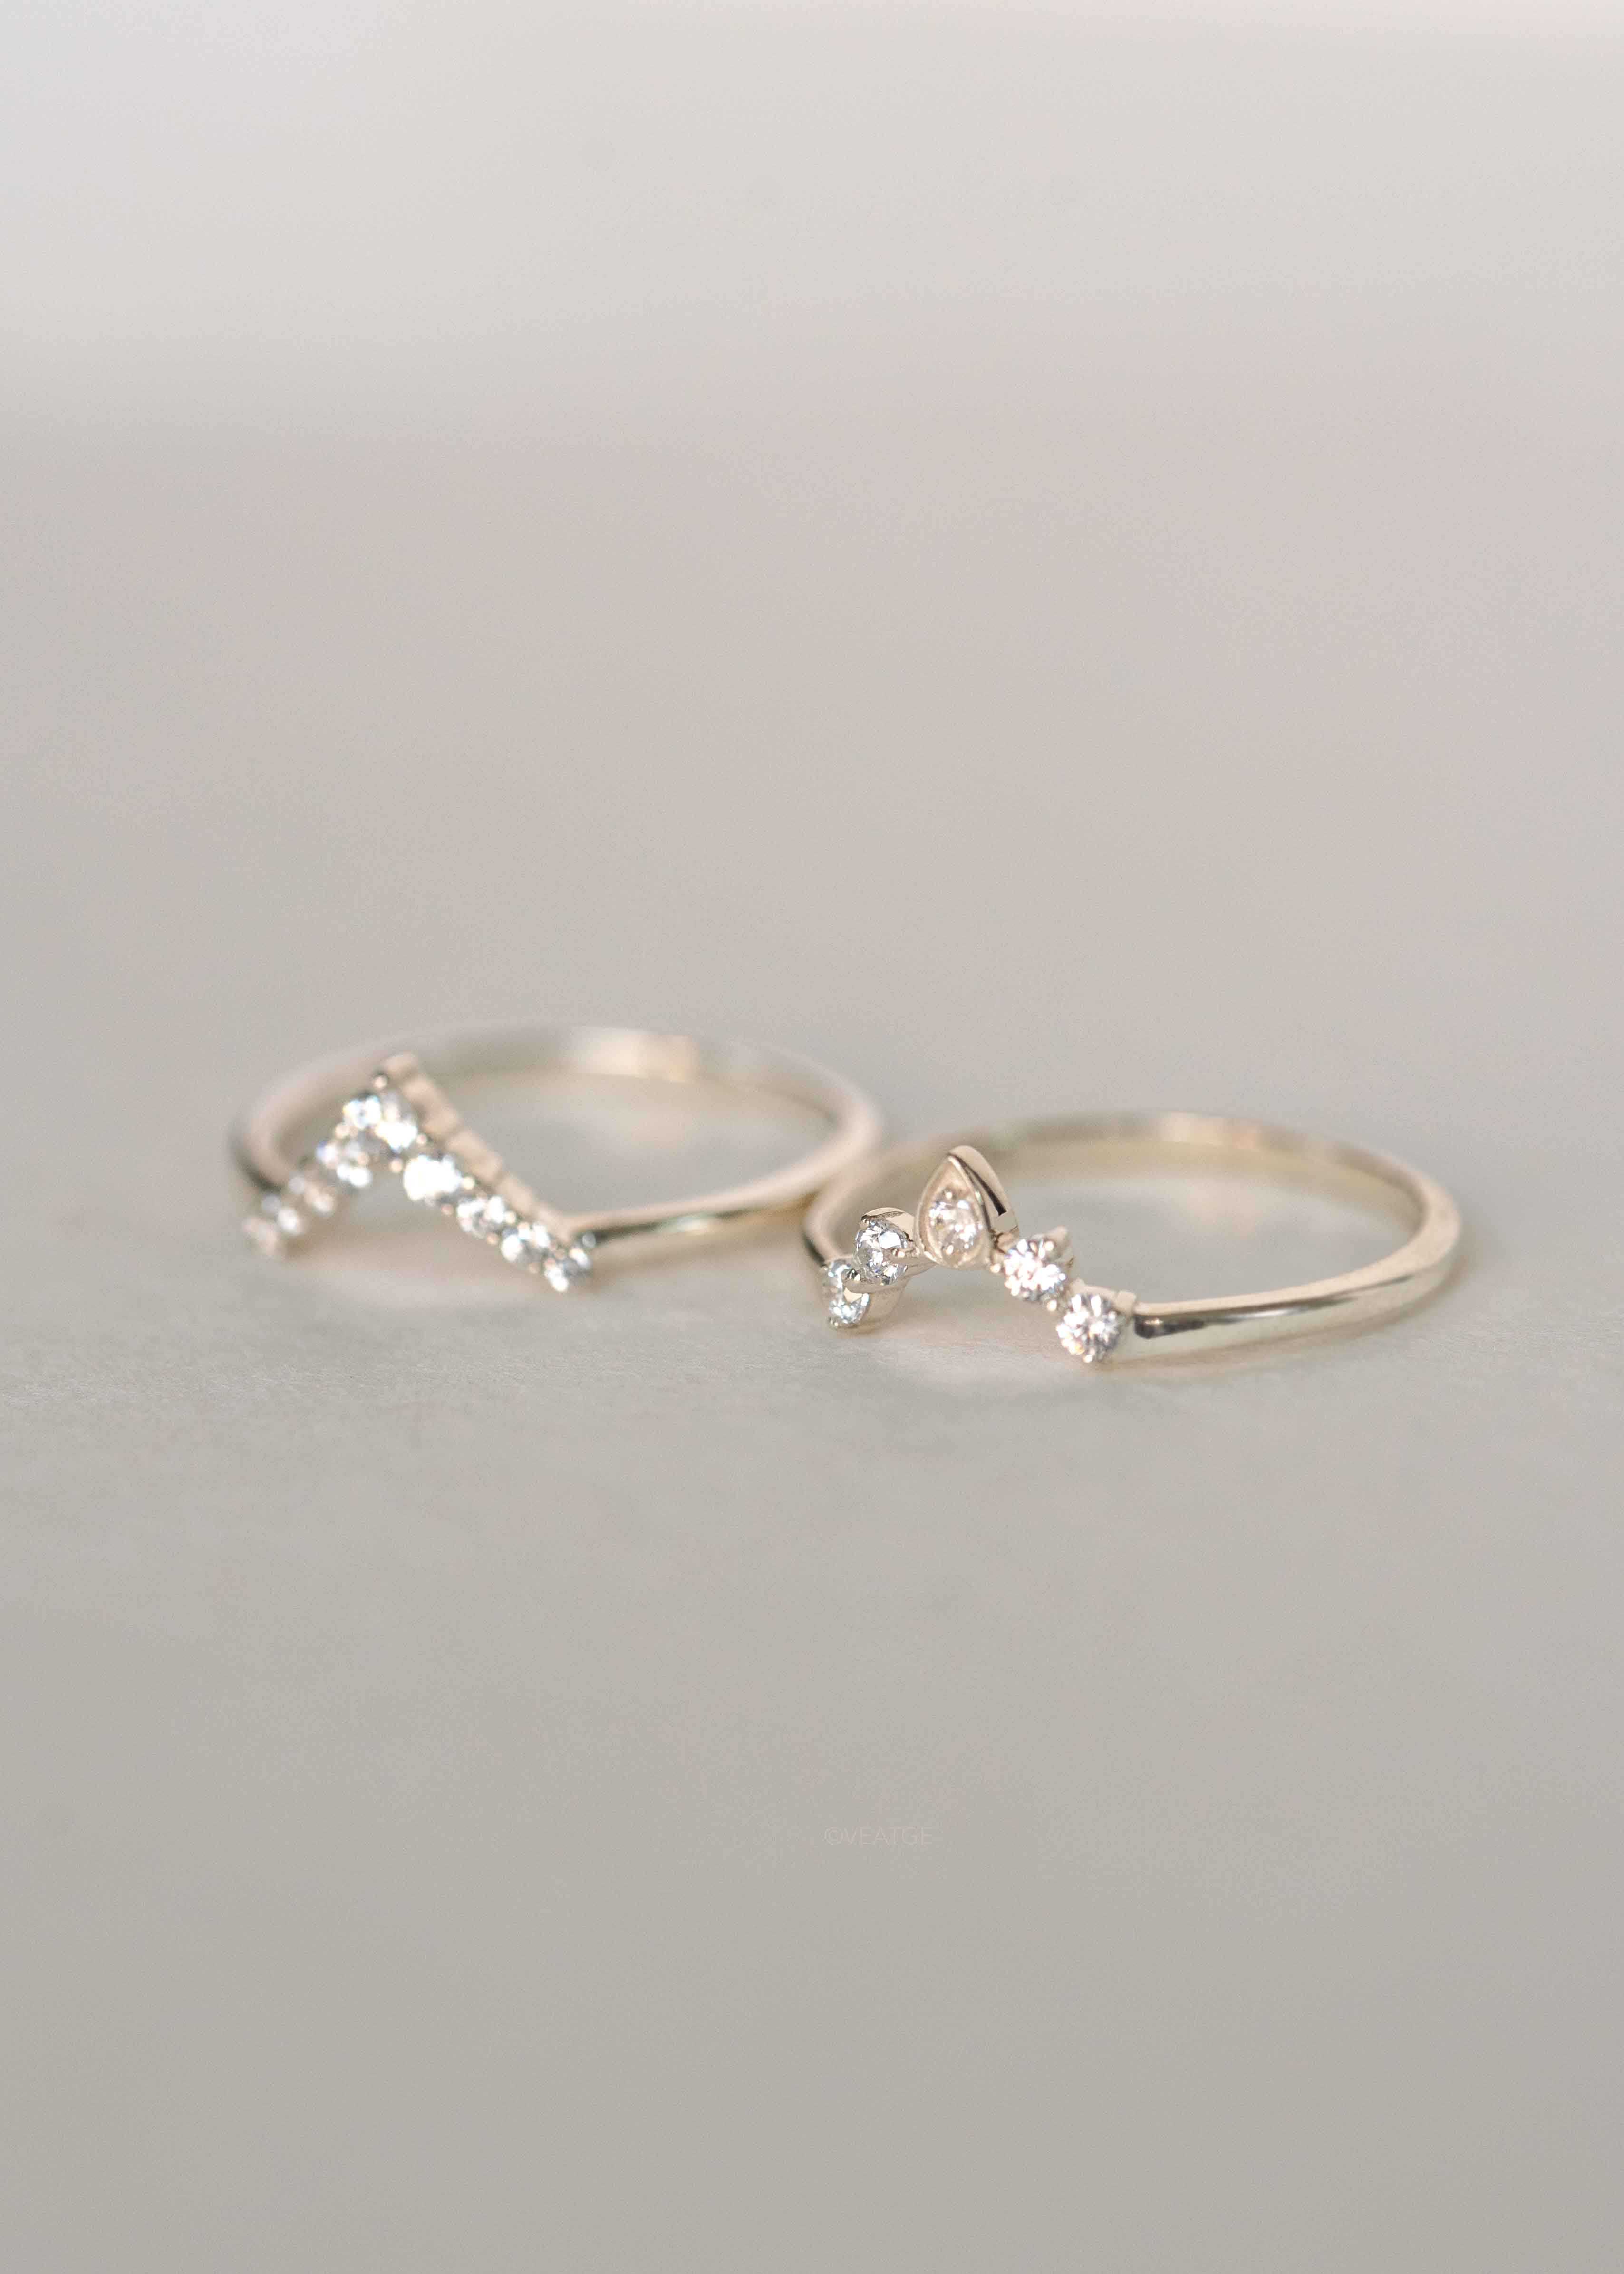 Gold Stacking Ring Set, Curved Rings, V rings in sterling silver diamonds